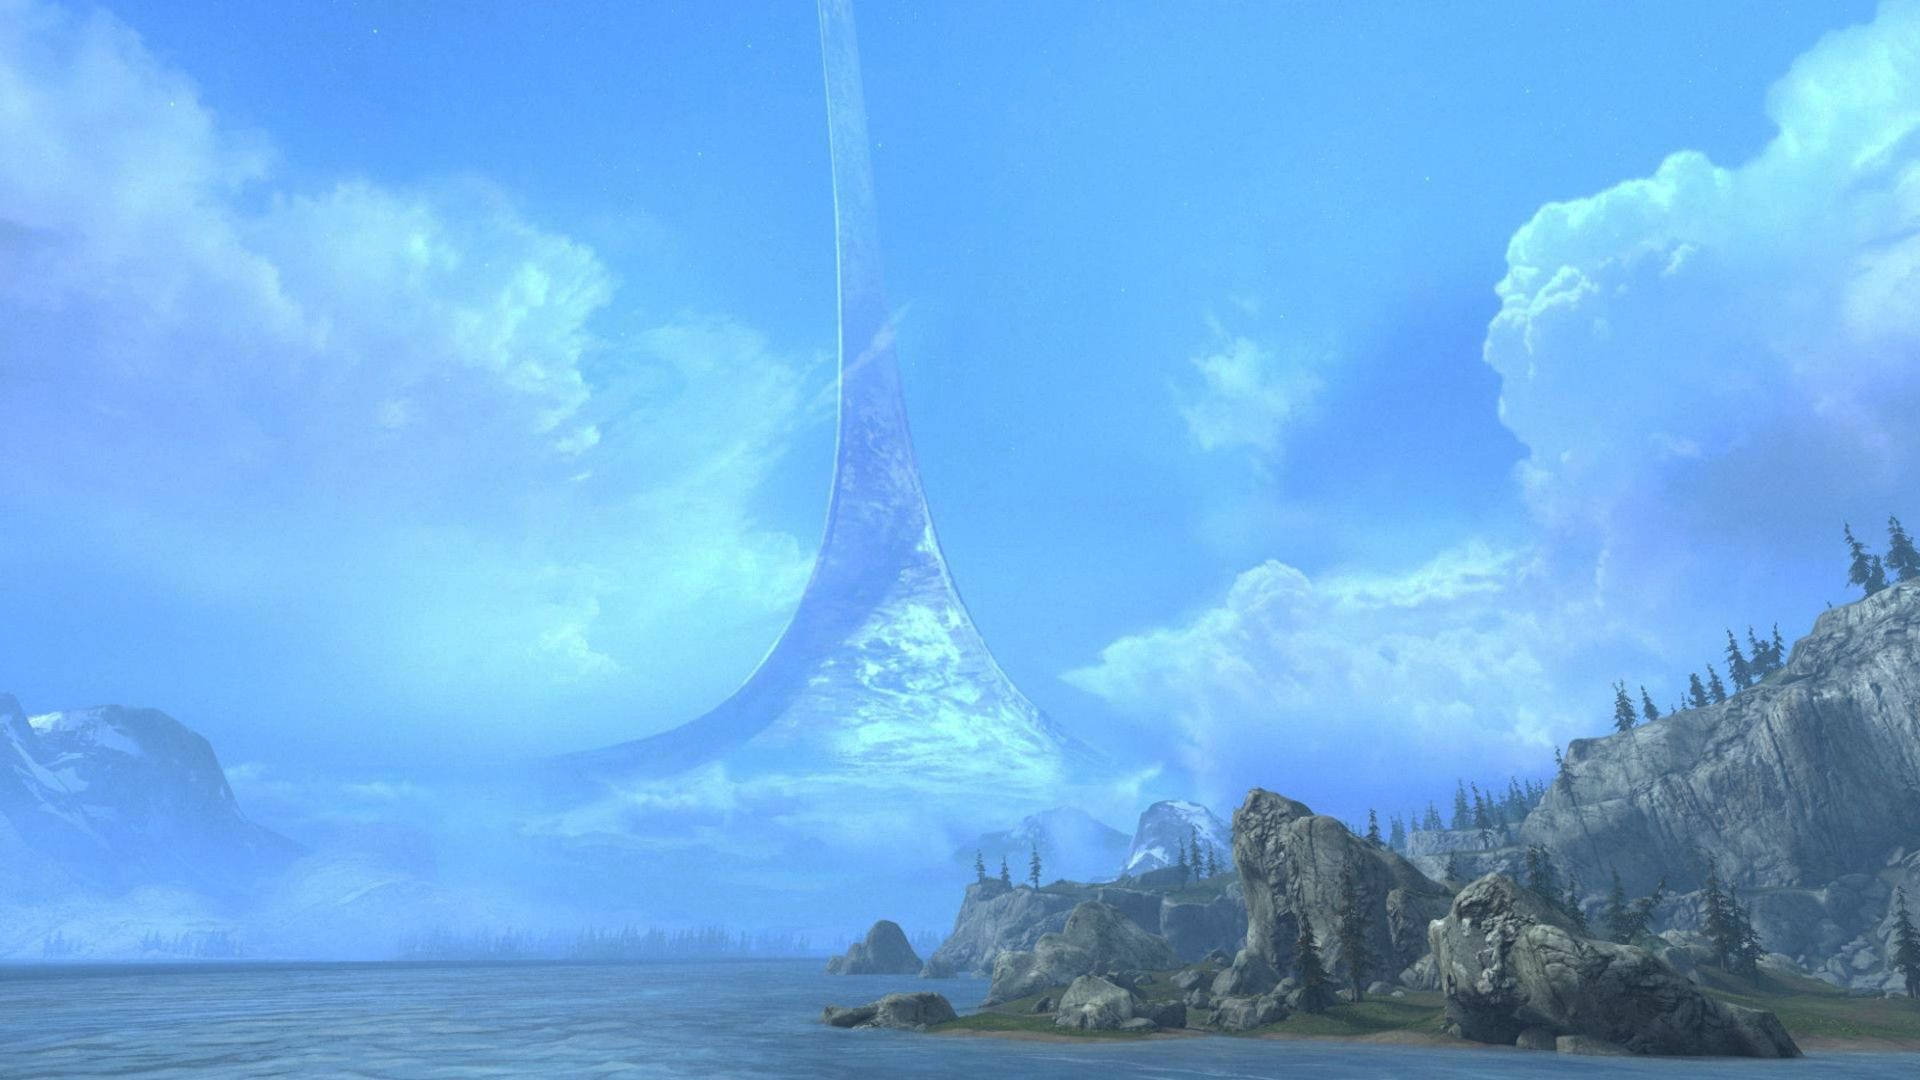 Explore the mysterious world of Halo Wallpaper